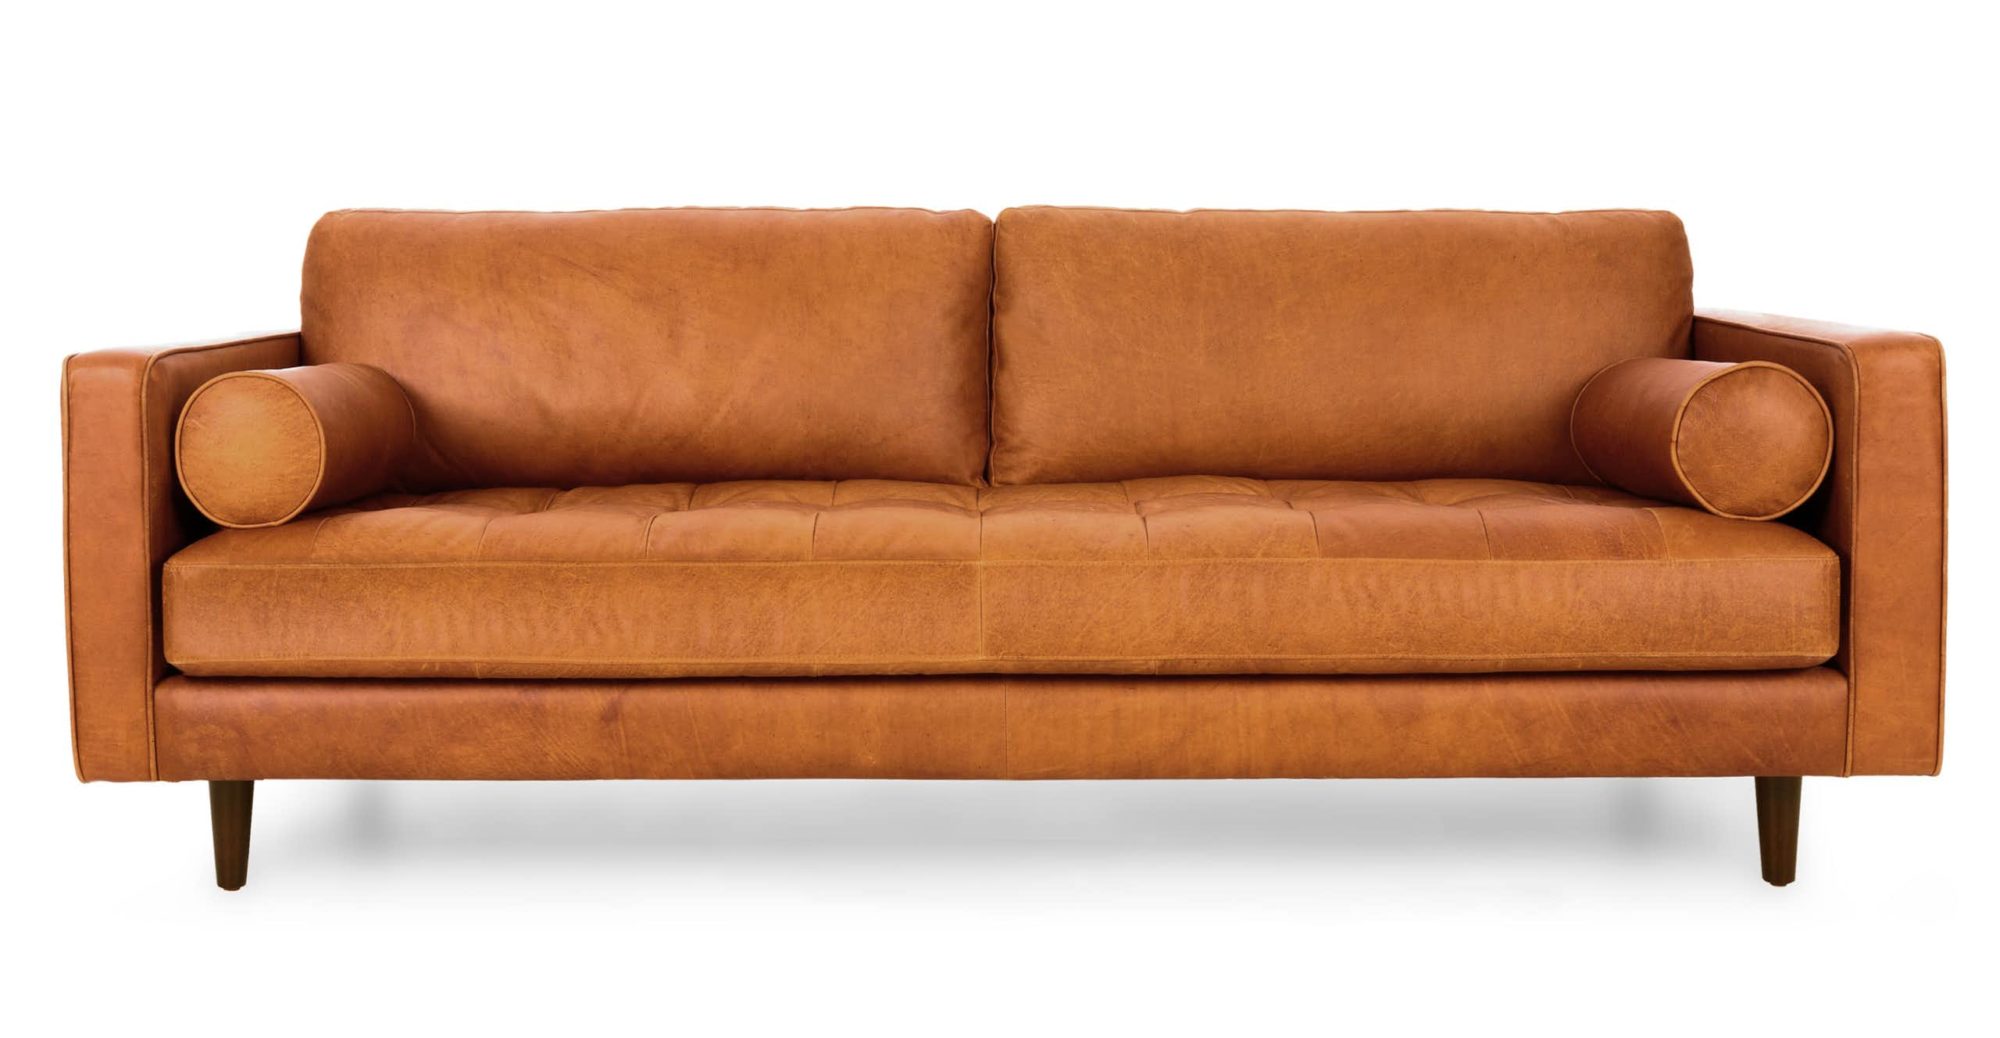 Our Crazy Beautiful New Sven Charme Tan Sofa from Article...